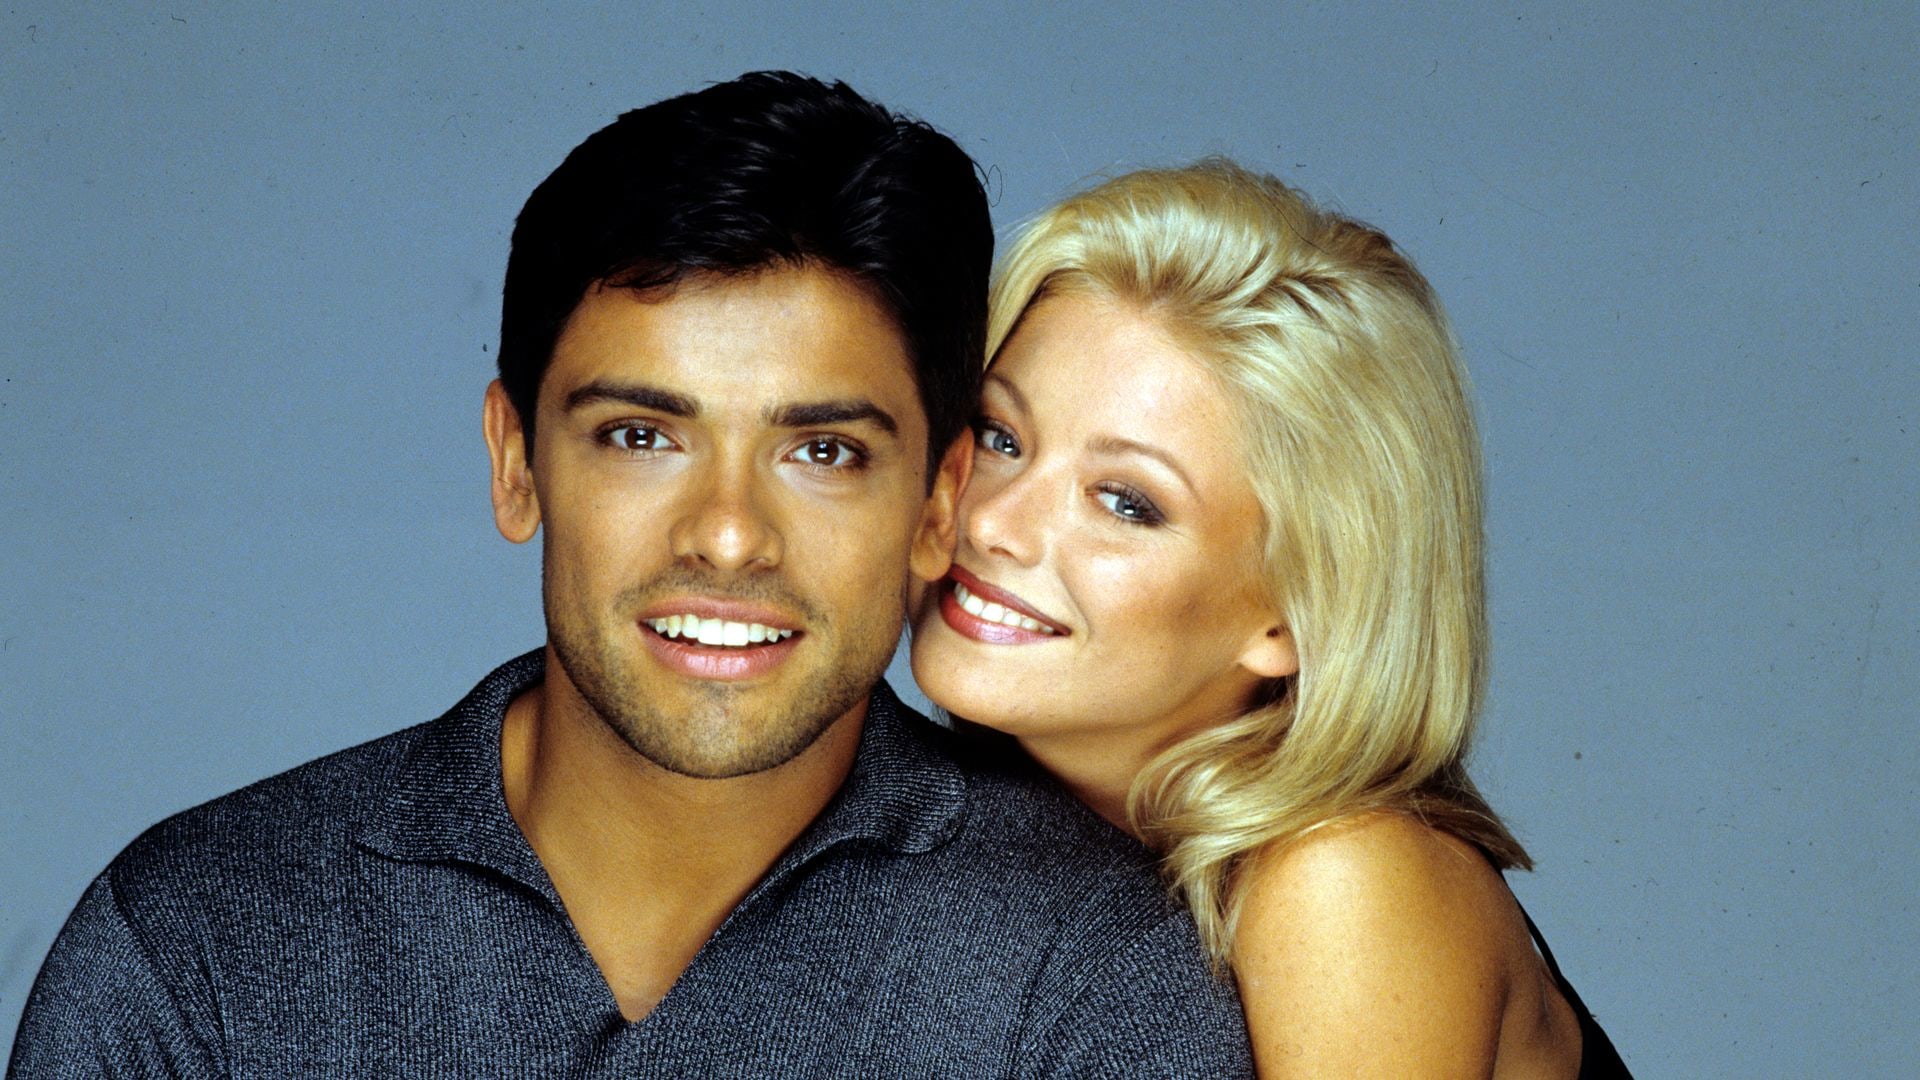 Kelly Ripa as Hayley Vaughn and Mark Consuelos as Mateo Santos on All My Children, July 15, 1996